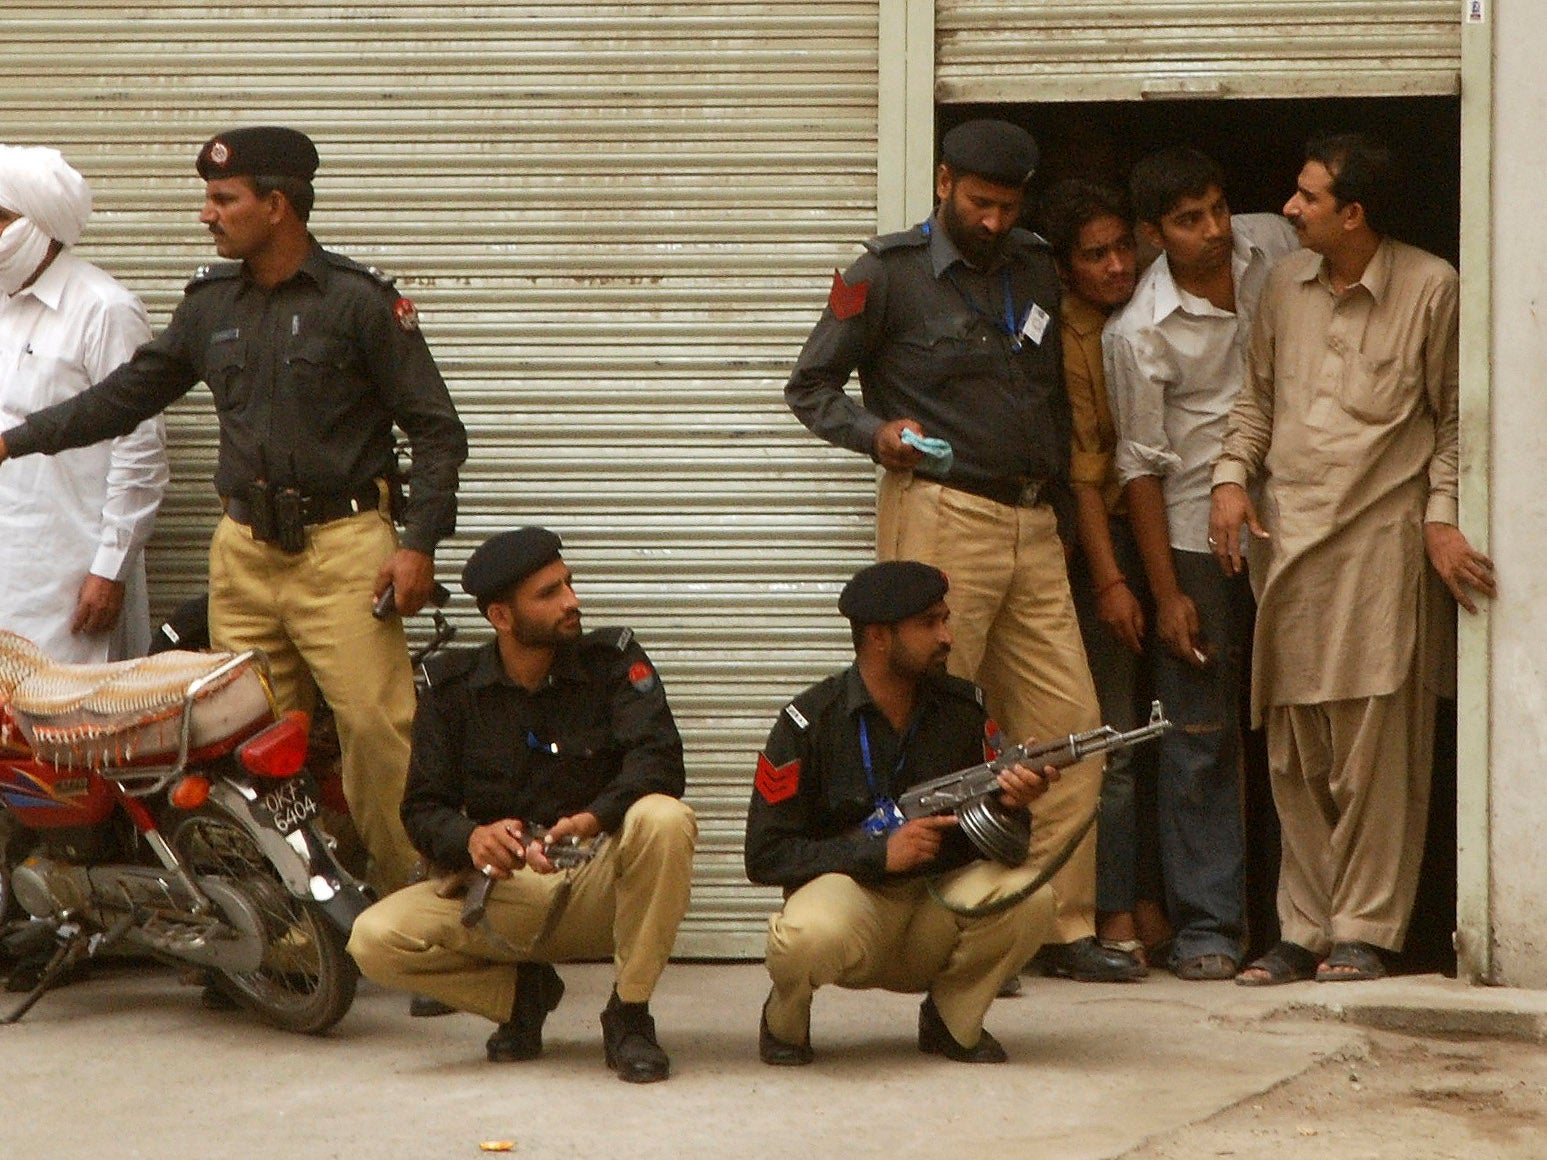 Shop keepers in Lahore's Garhi Shahu neighborhood look past policemen who arrived after gunmen attacked an Ahmadi mosque in the area